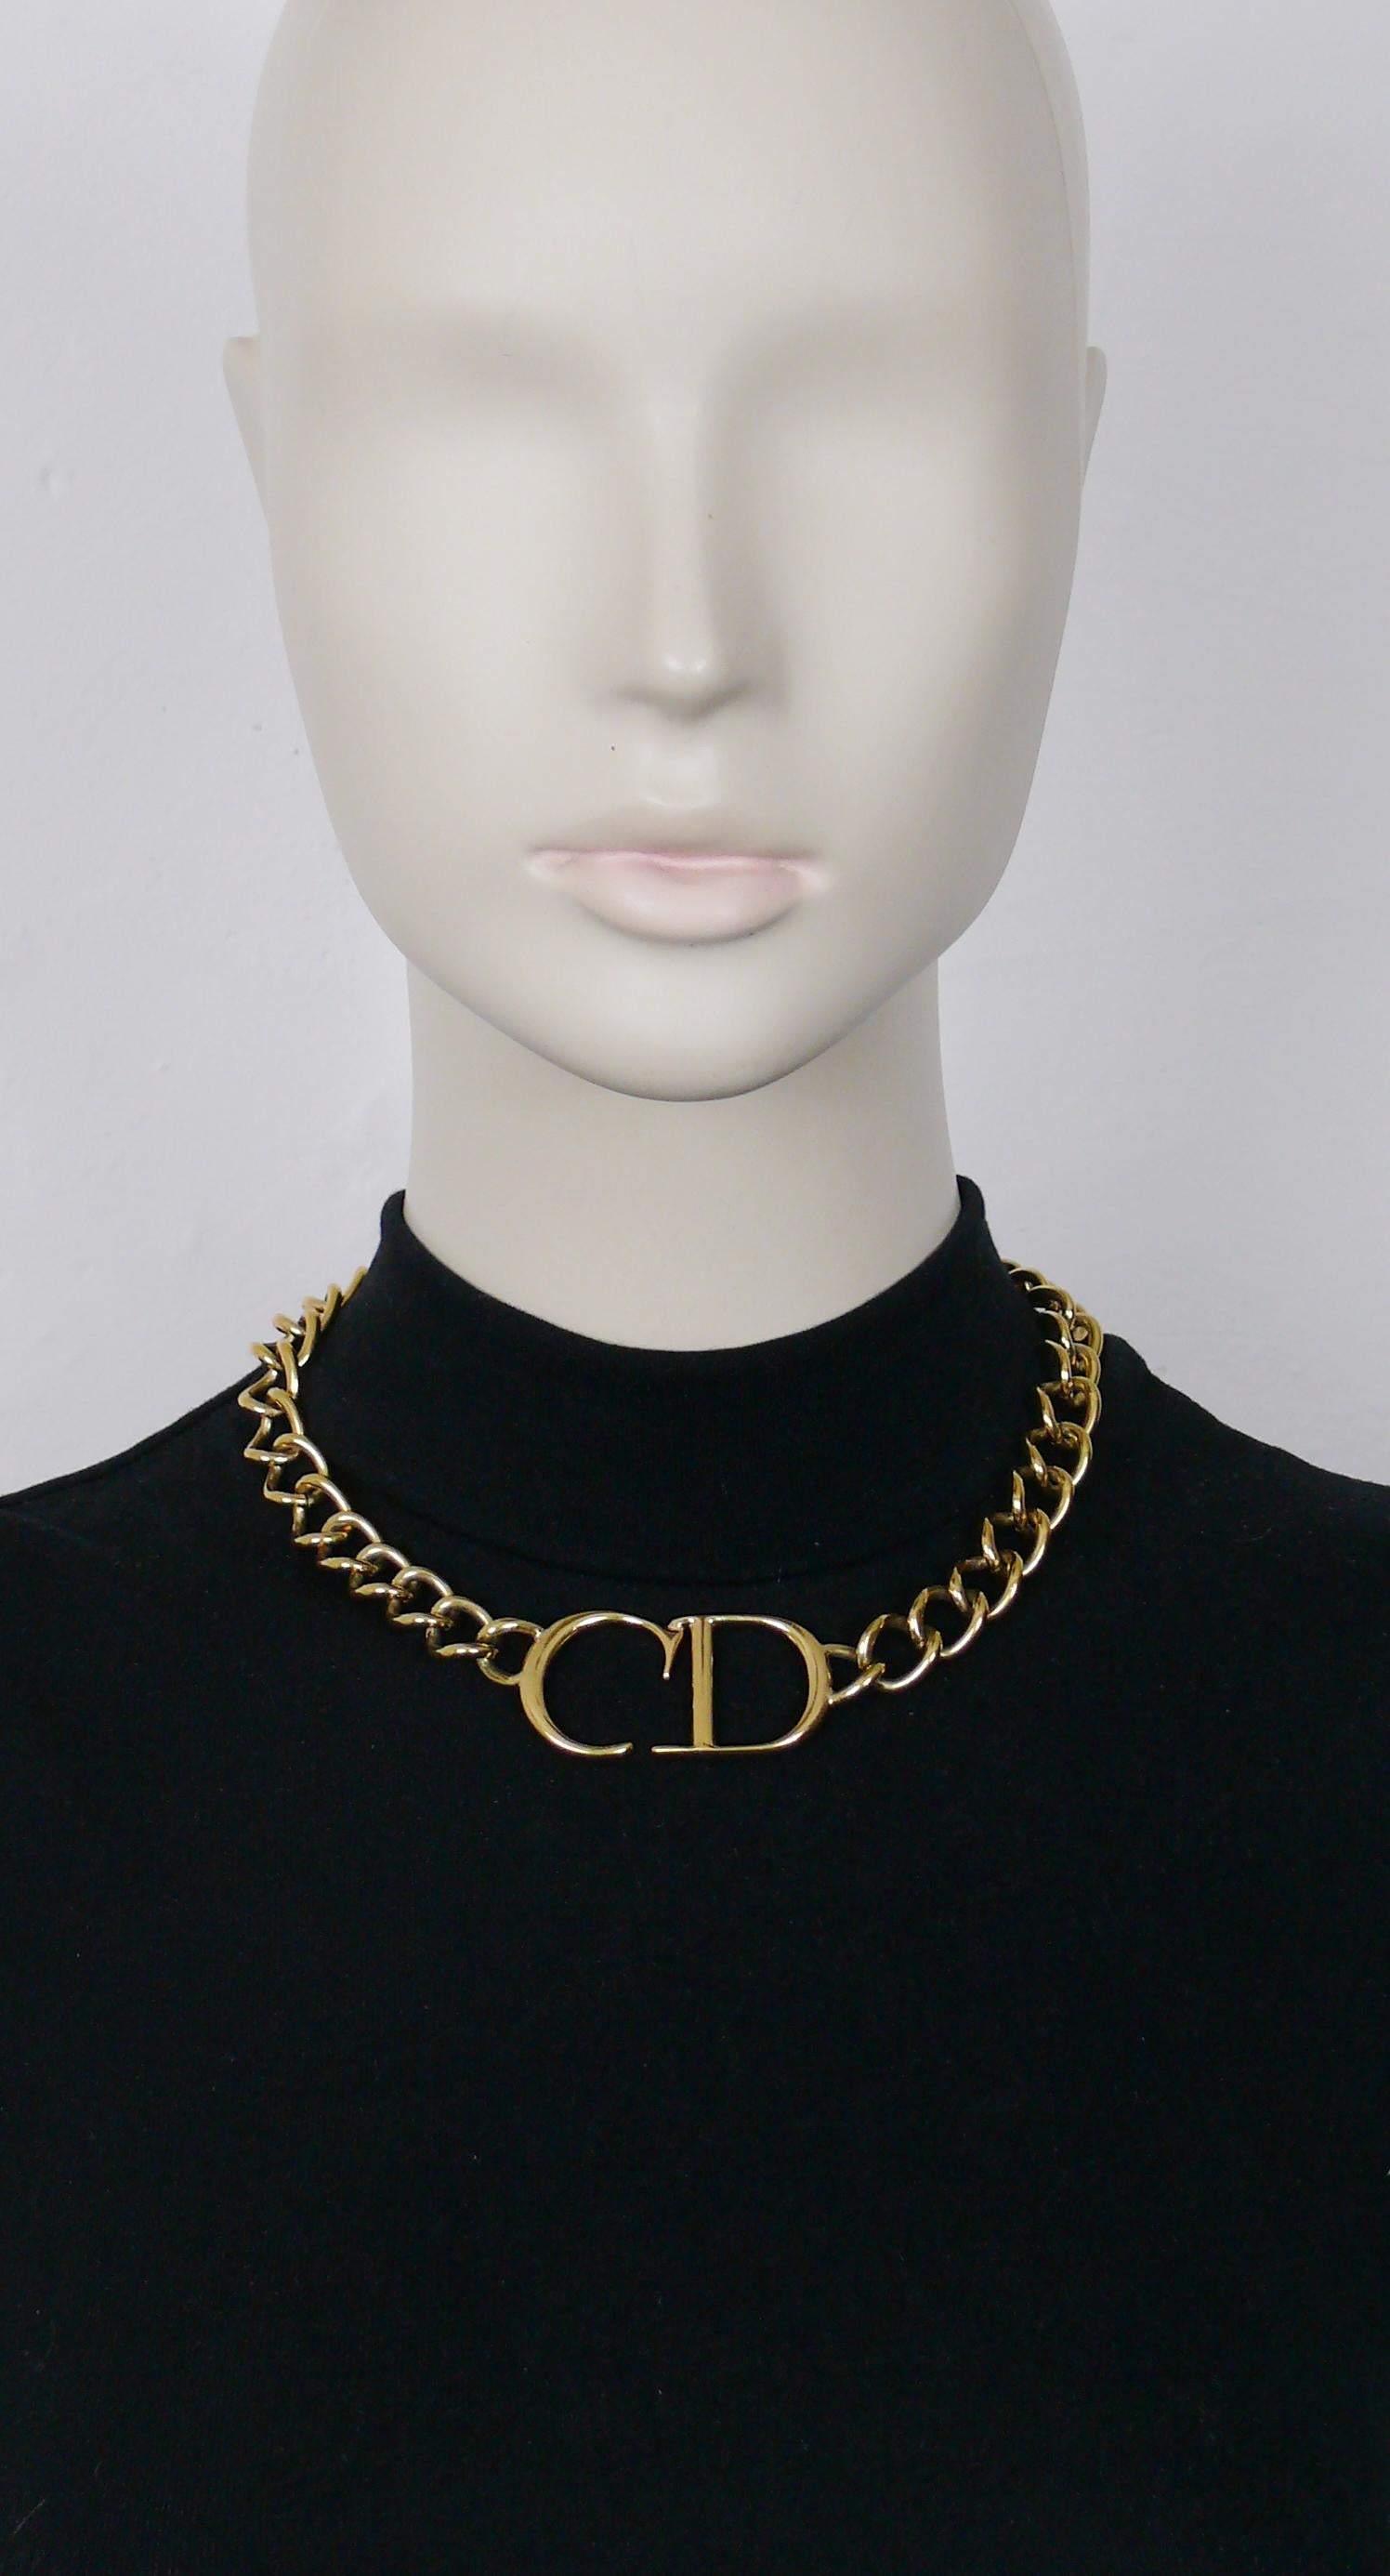 CHRISTIAN DIOR gold toned chain necklace featuring a CD logo.

Hook clasp closure.
Adjustable length.

Embossed DIOR ©.

Indicative measurements : max. wearable length approx. 46 cm (18.11 inches)  / link width approx. 1.3 cm (0.51 inch) / ID tag